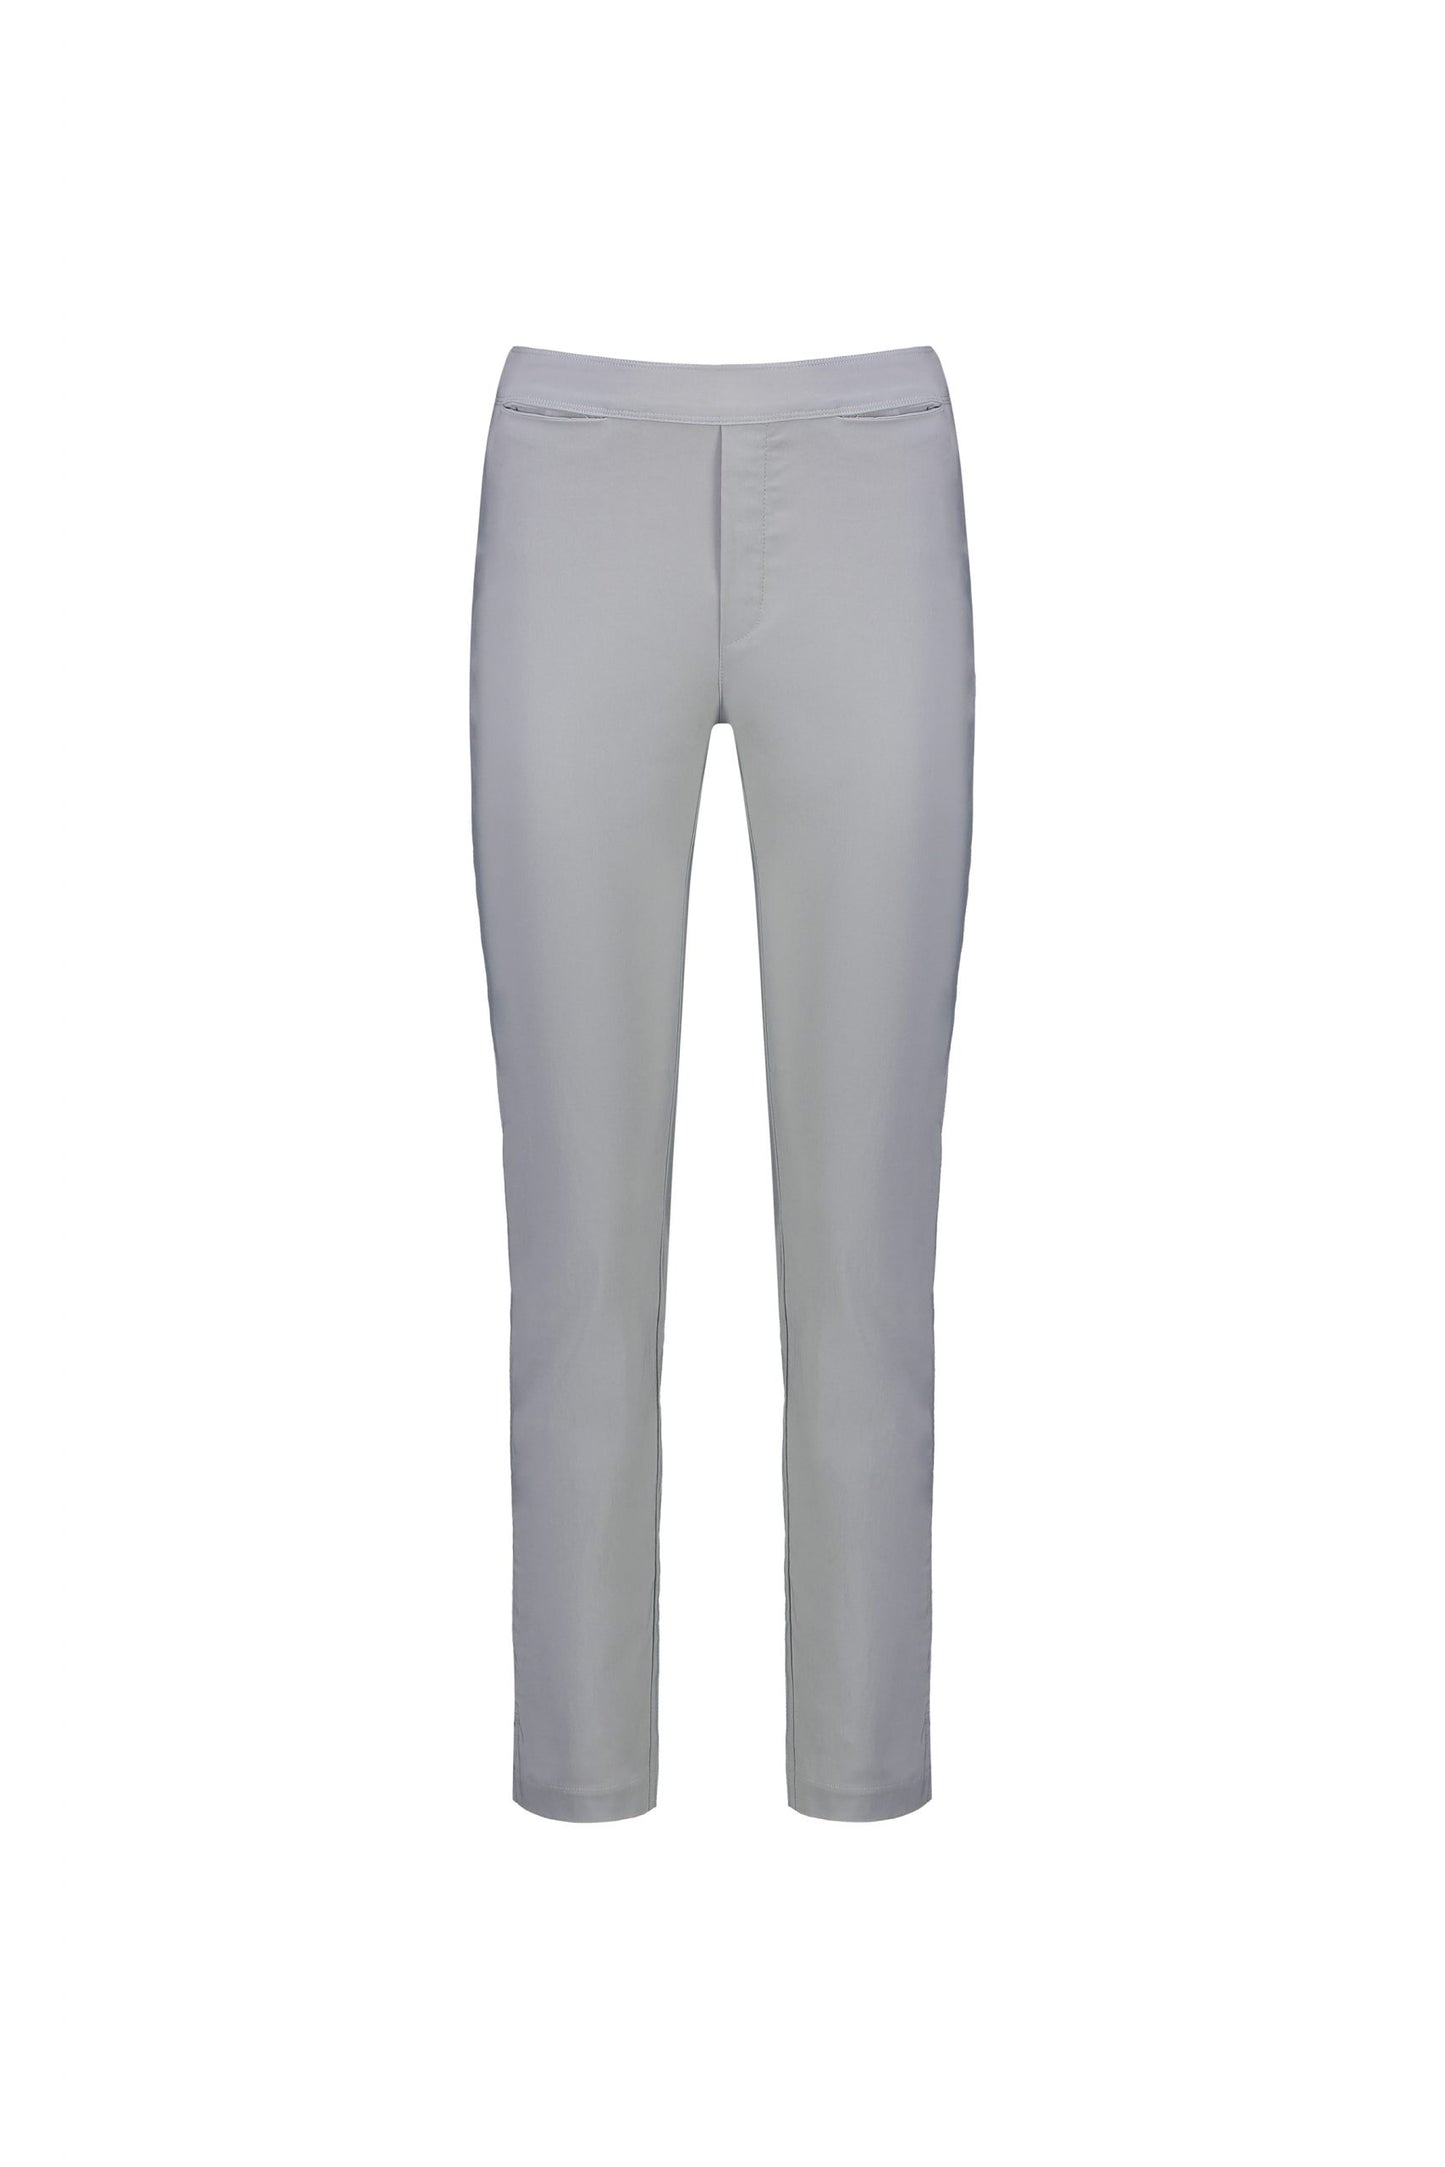 Macjays - M5261 - Caprice in Faille Pant - Silver